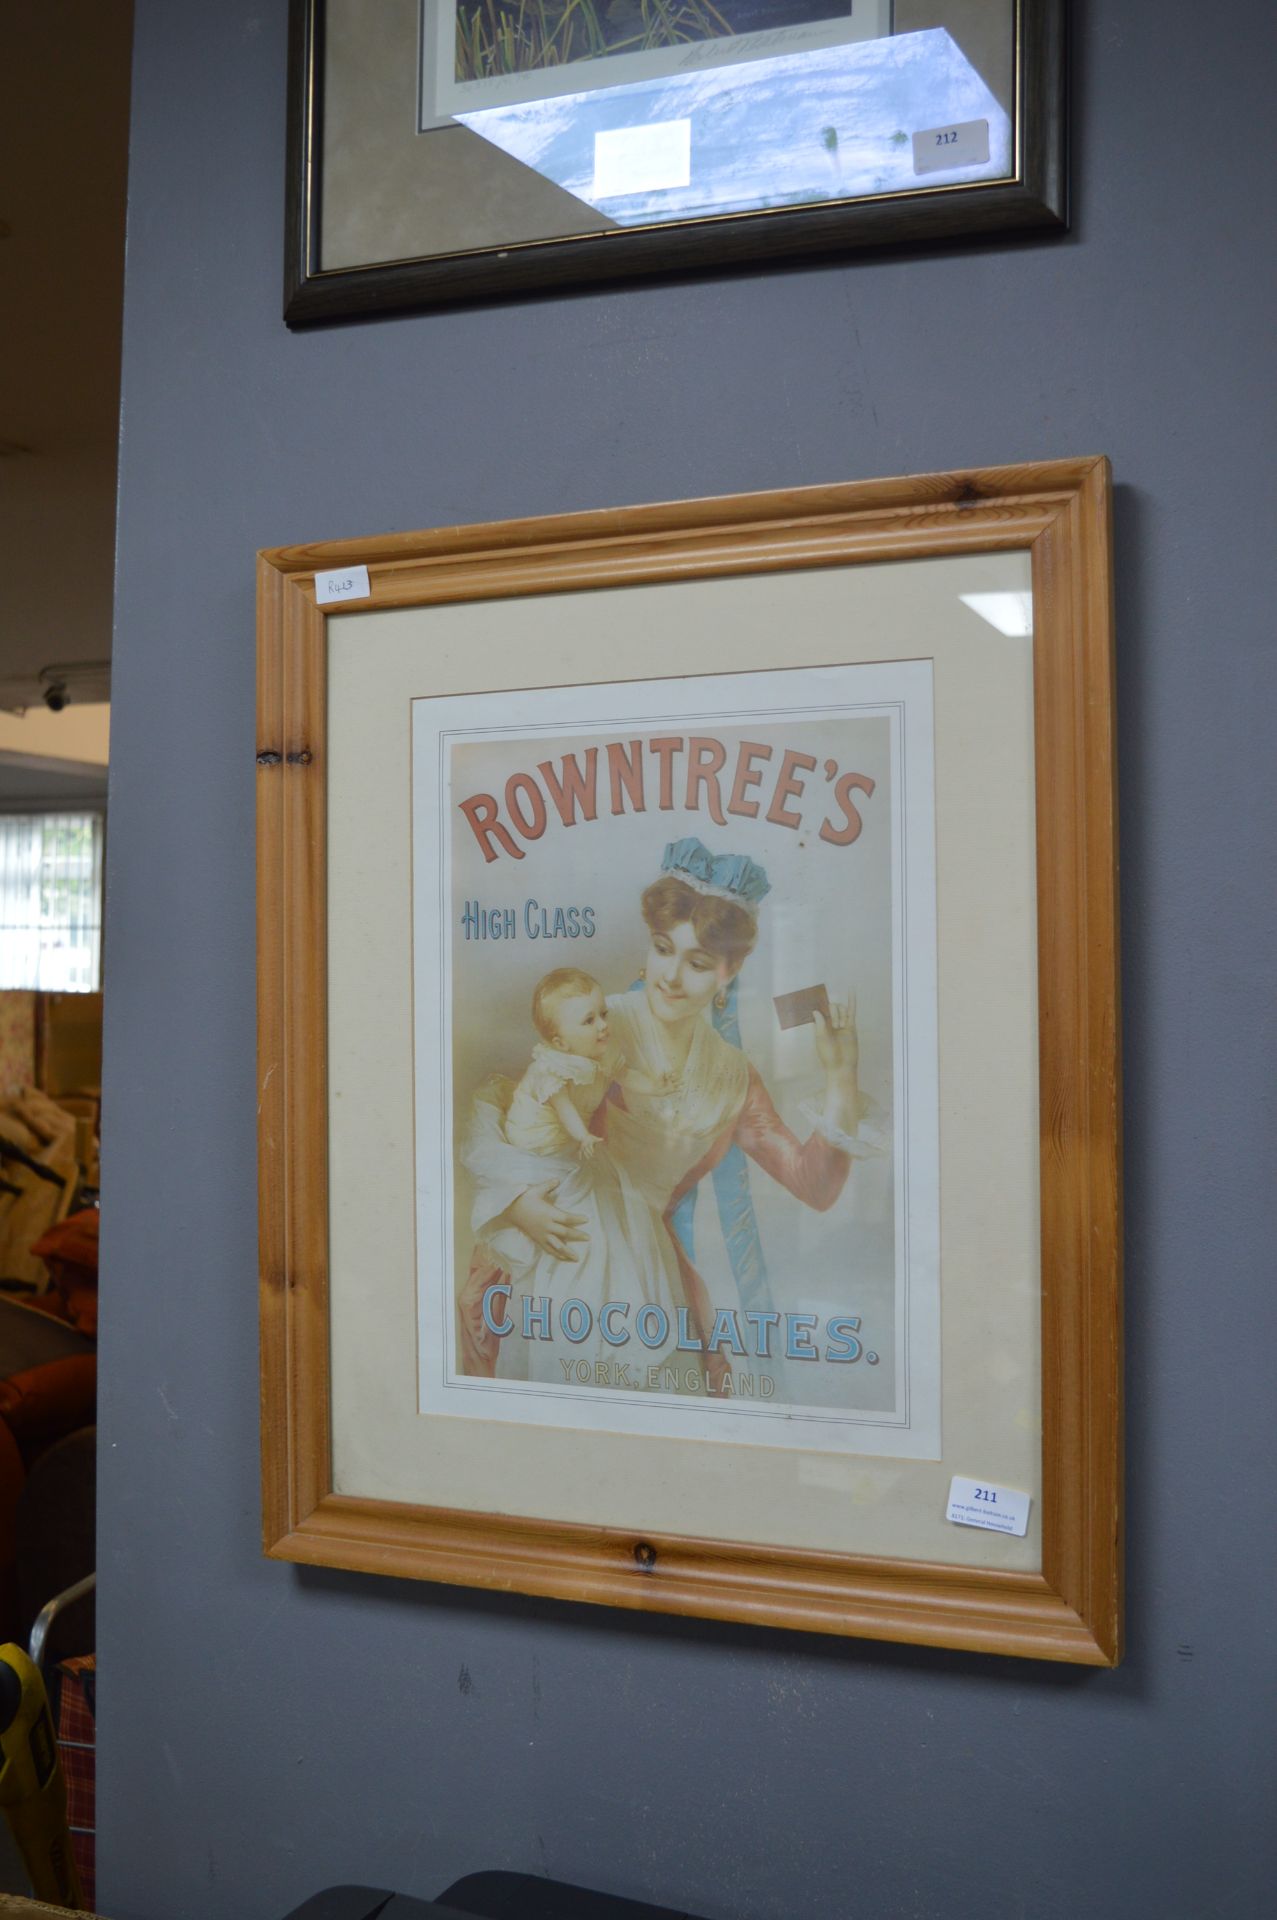 Reproduction Roundtrees Chocolates Framed Print